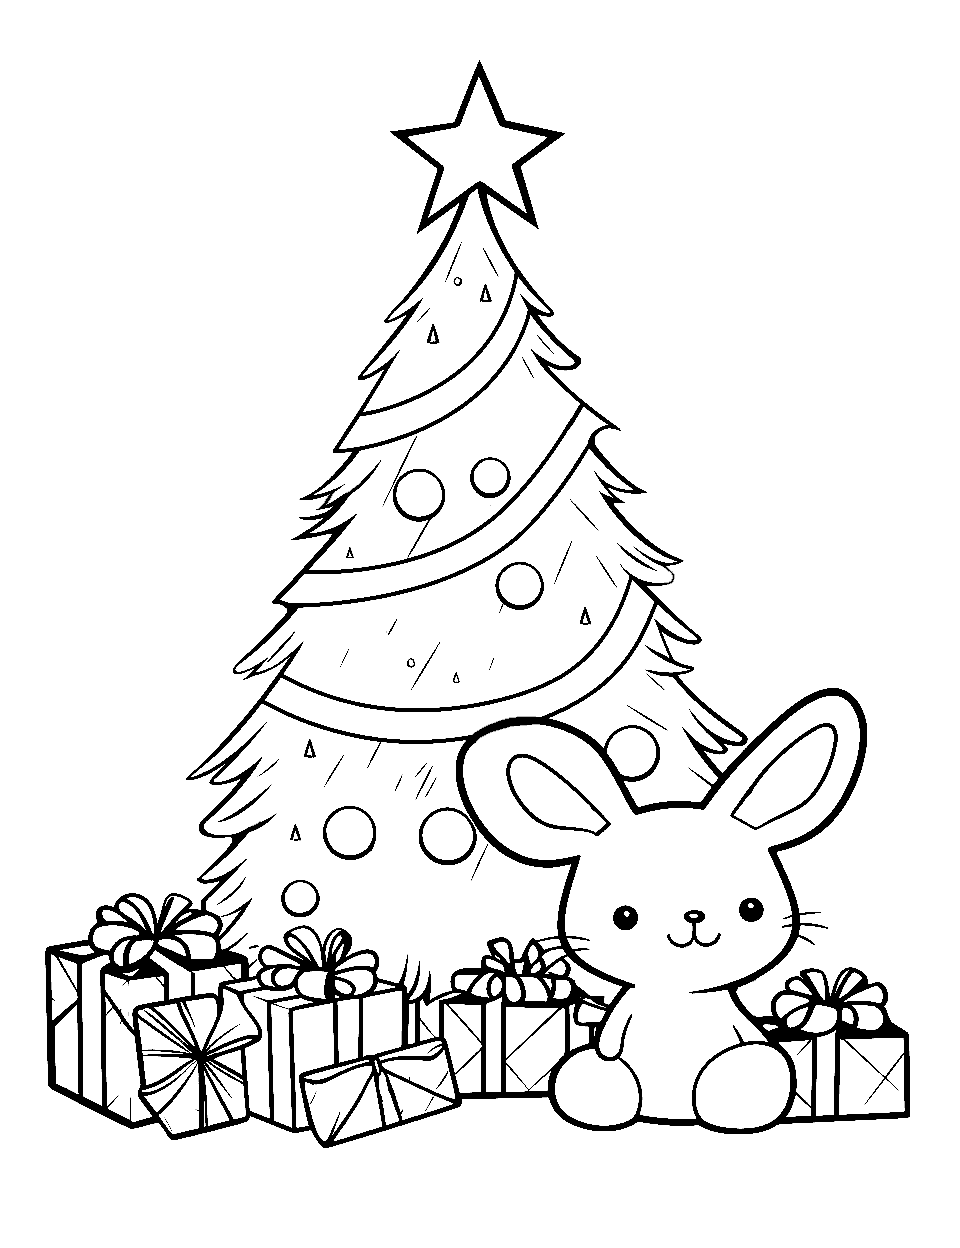 Cute Bunny and the Tree Coloring Page - A cute bunny sitting next to a sparkling Christmas tree with presents underneath.